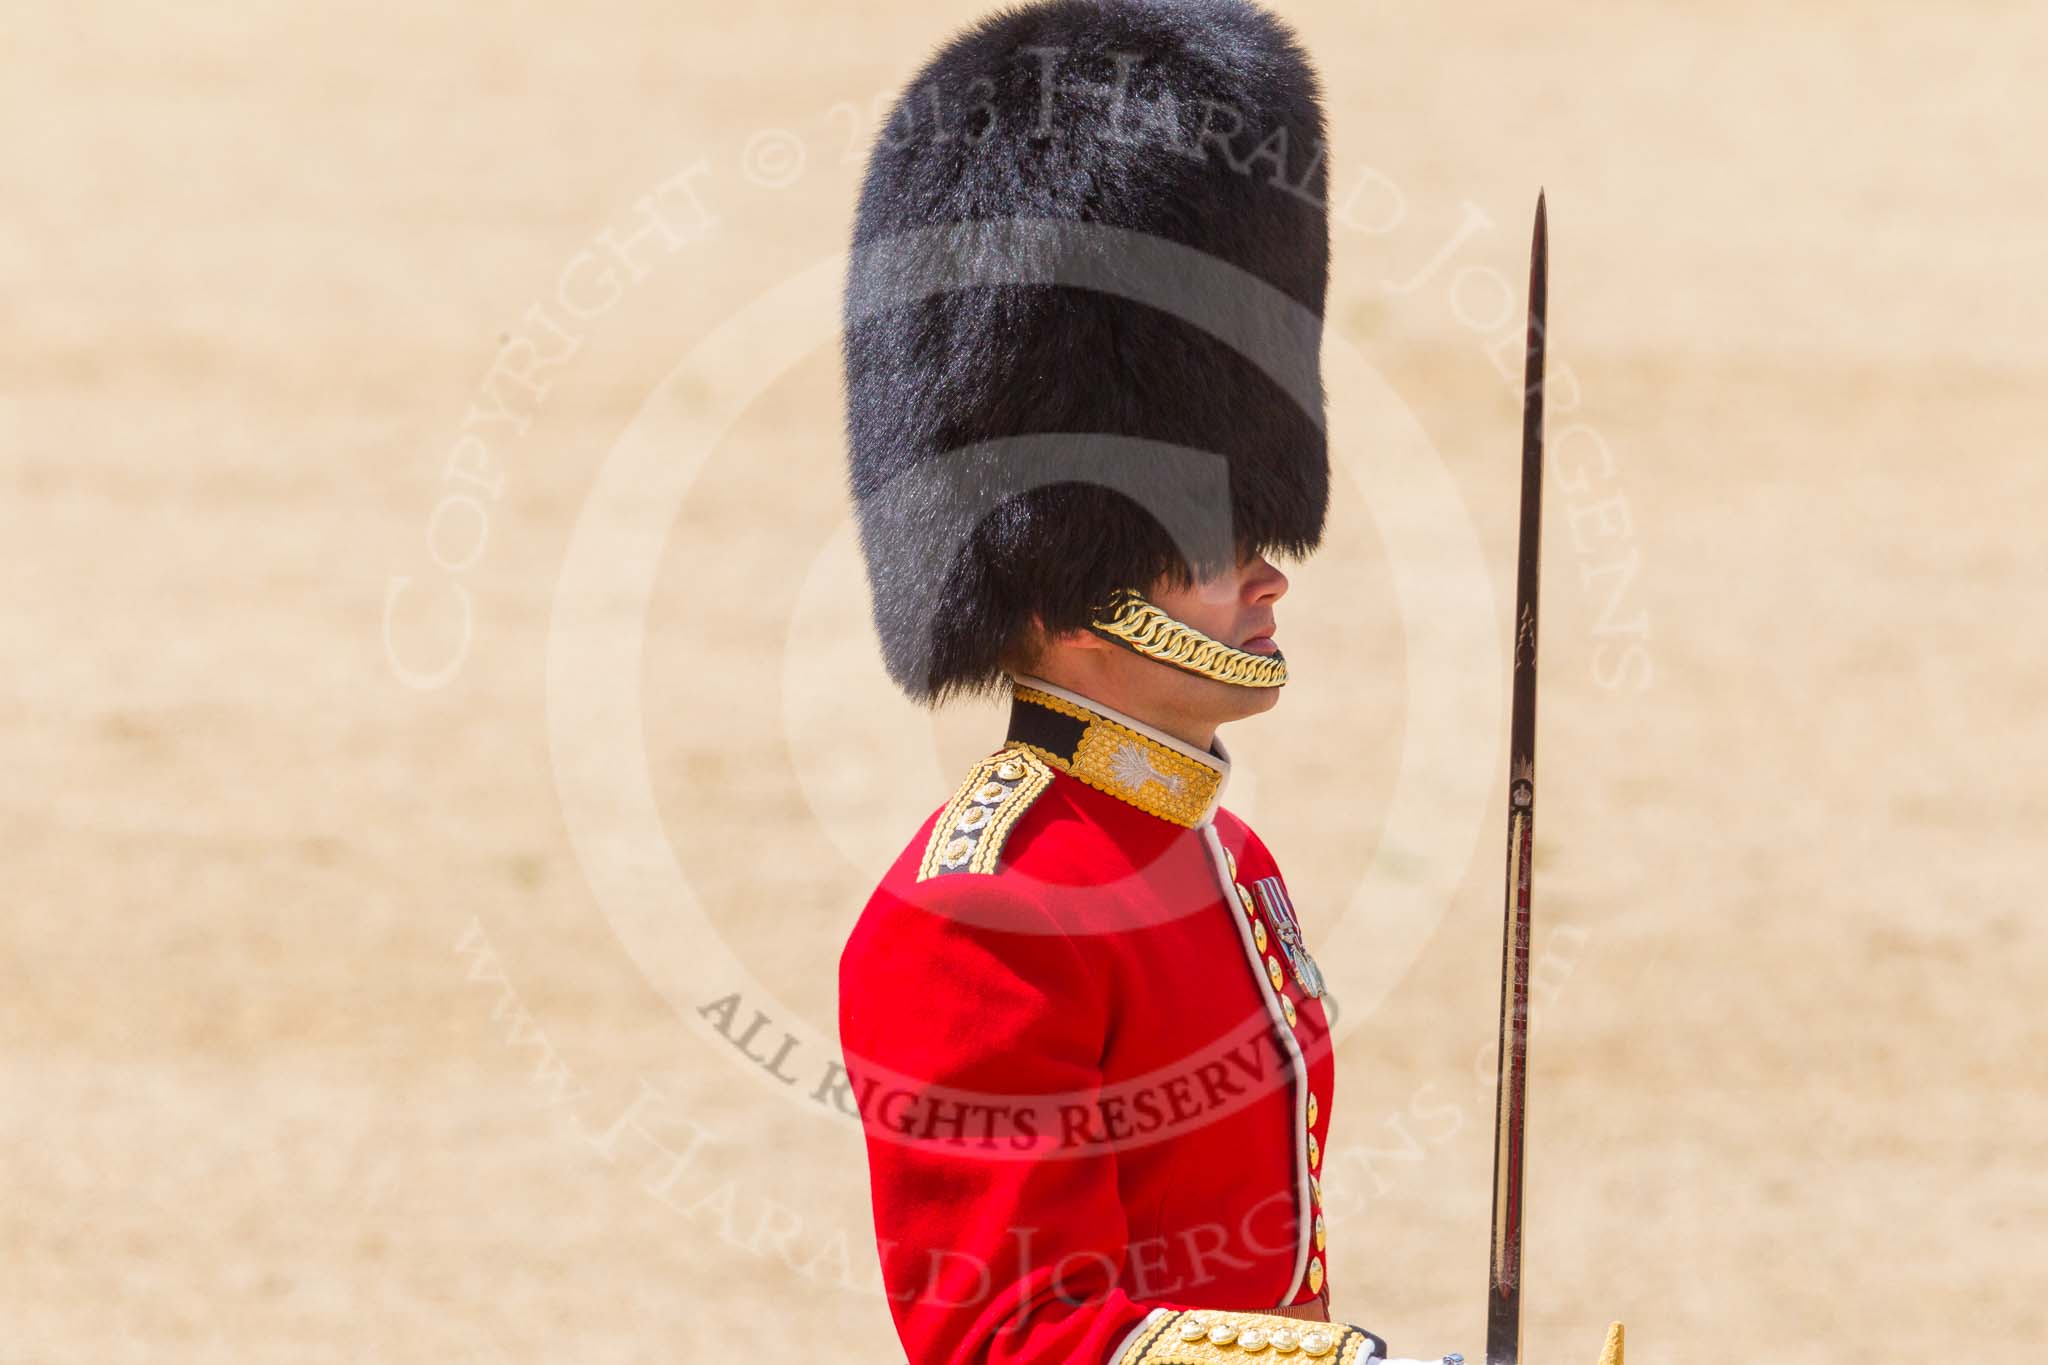 The Colonel's Review 2015.
Horse Guards Parade, Westminster,
London,

United Kingdom,
on 06 June 2015 at 11:34, image #380